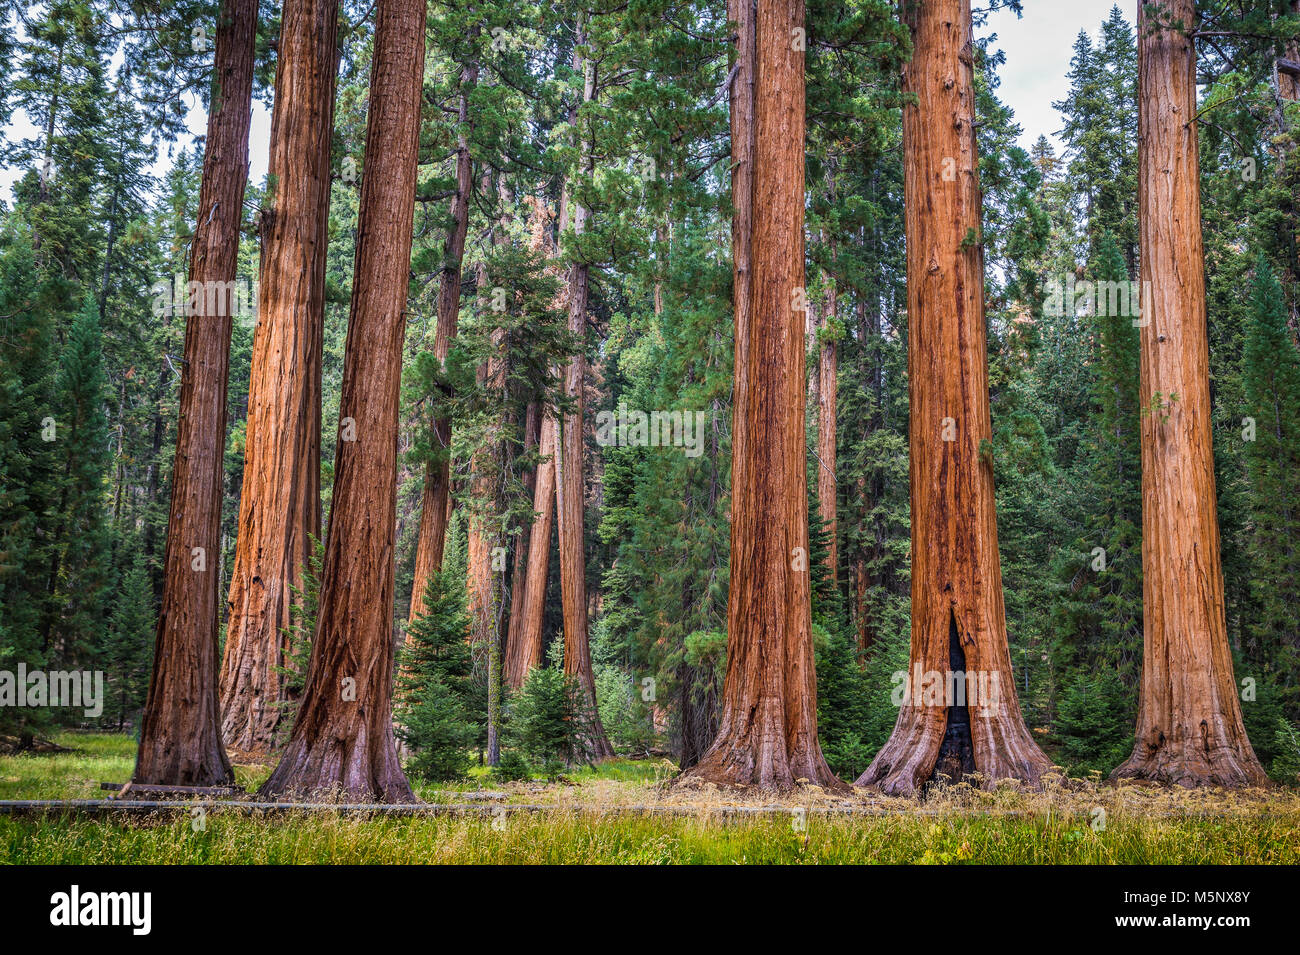 Giant sequoia trees, also known as giant redwoods or Sierra redwoods, on a sunny day with green meadows in summer, Sequoia National Park, California Stock Photo